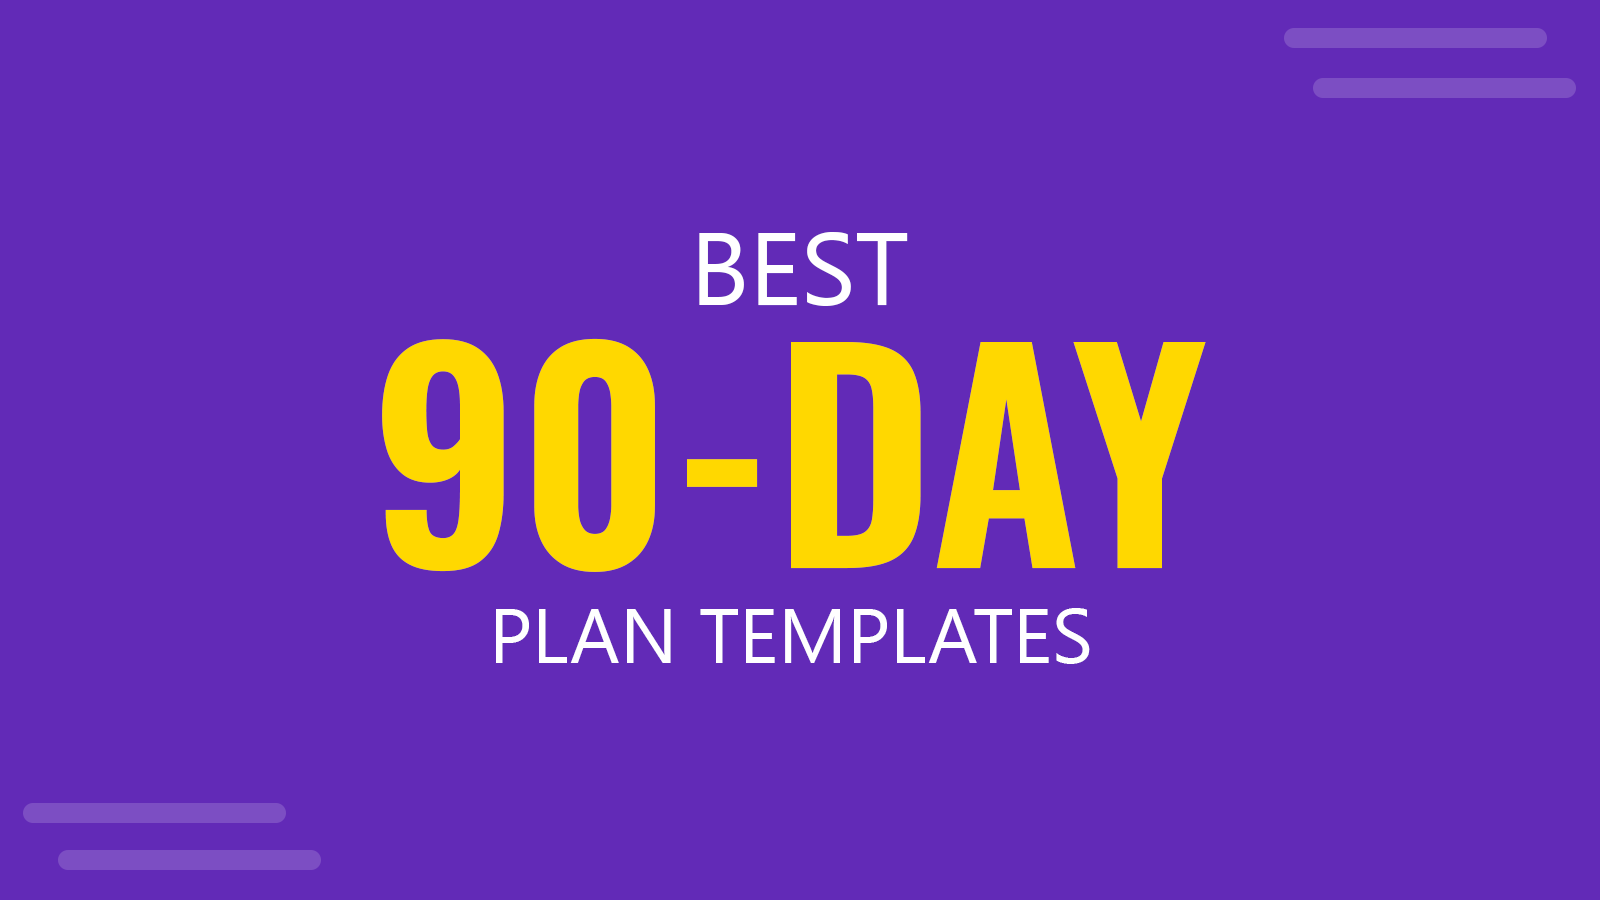 Best 90 Day Plan Templates for PowerPoint